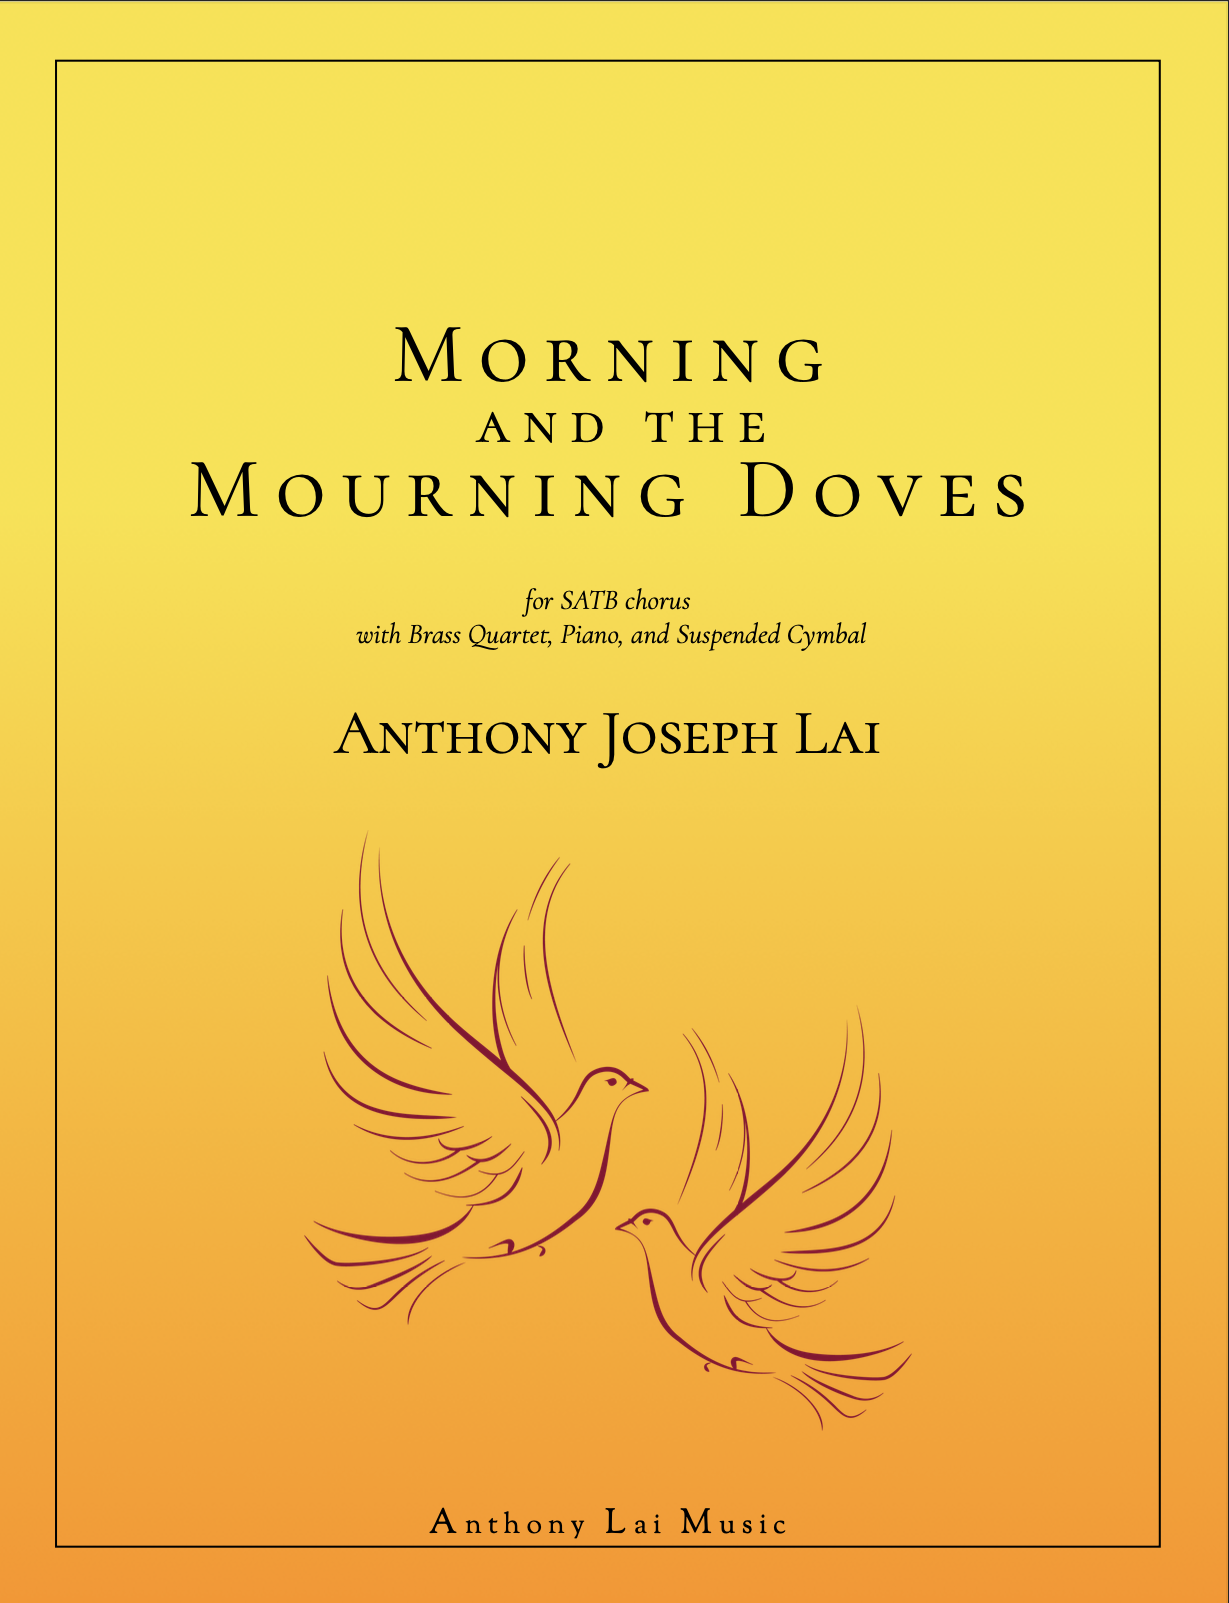 Morning And The Mourning Doves by Anthony Joseph Lai